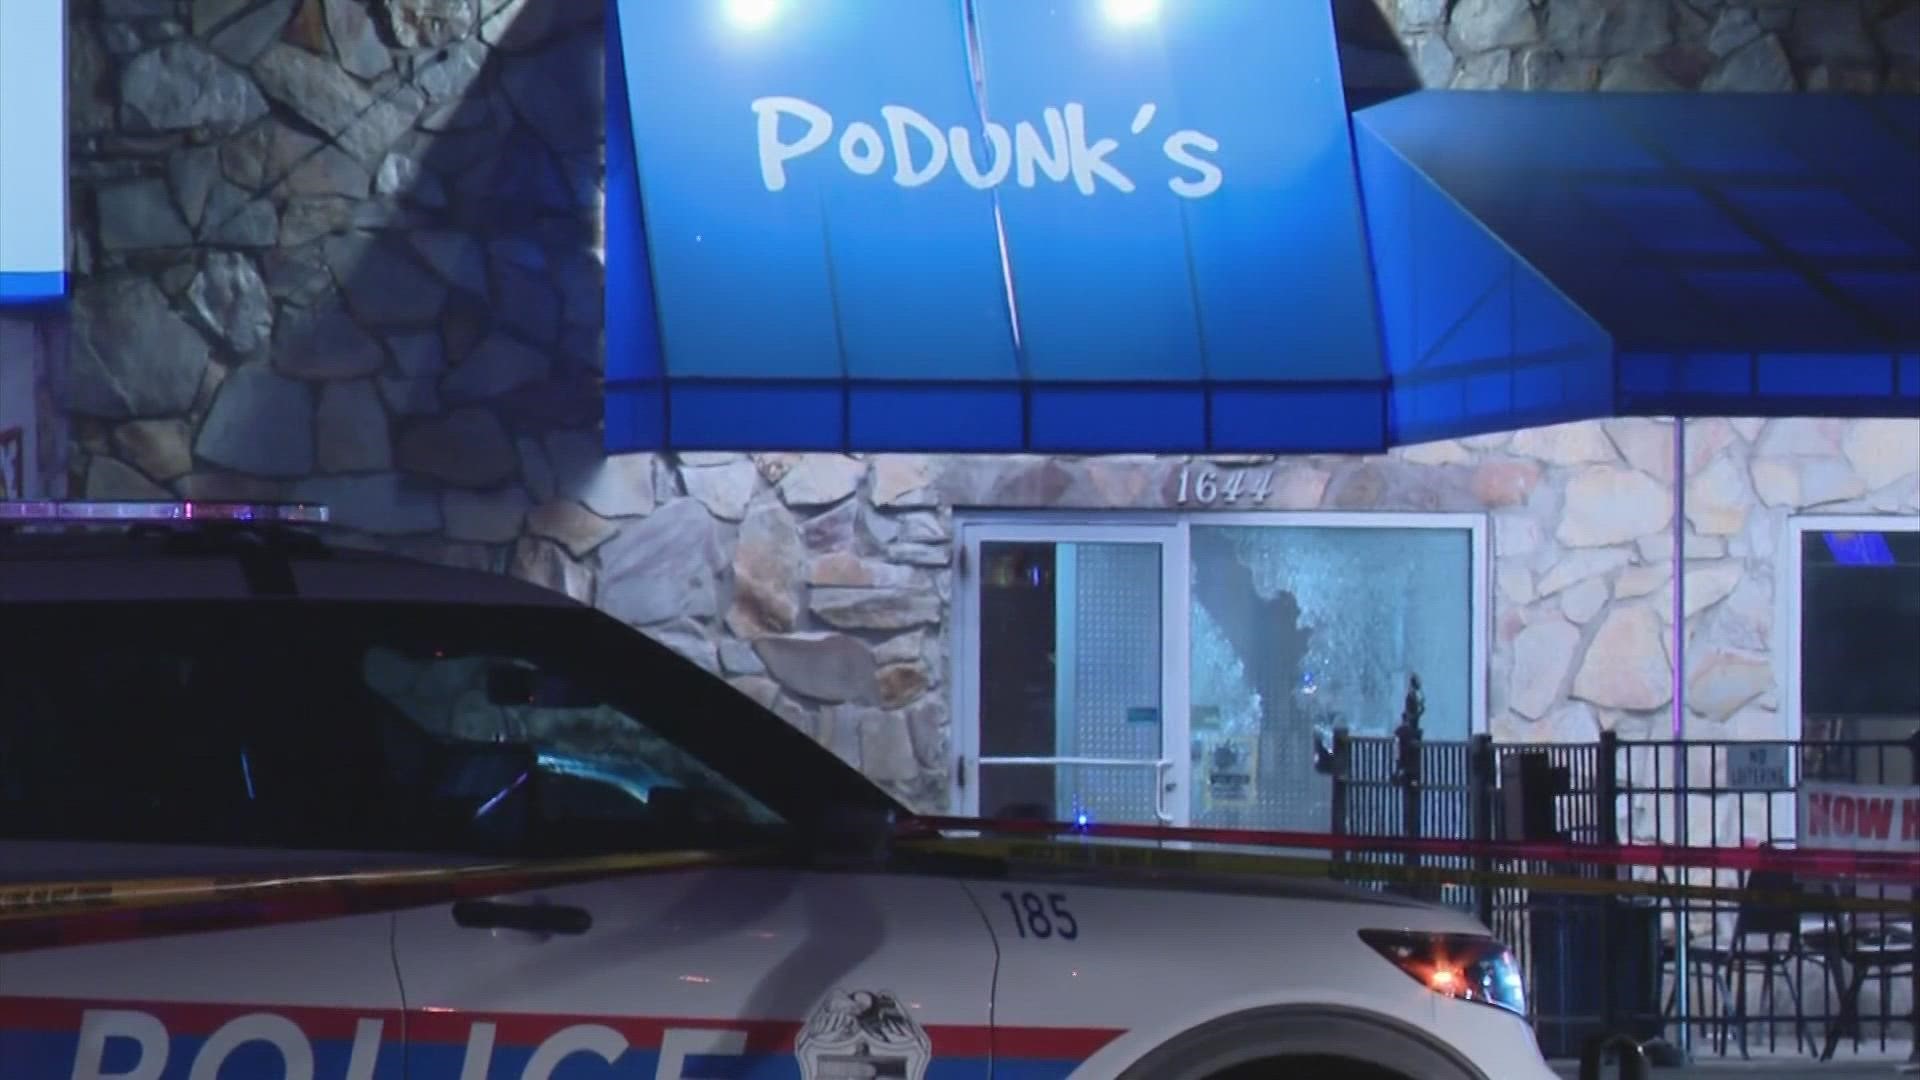 Columbus police say they have been called to Podunk's bar on East Dublin-Granville Road 47 times over the last year.